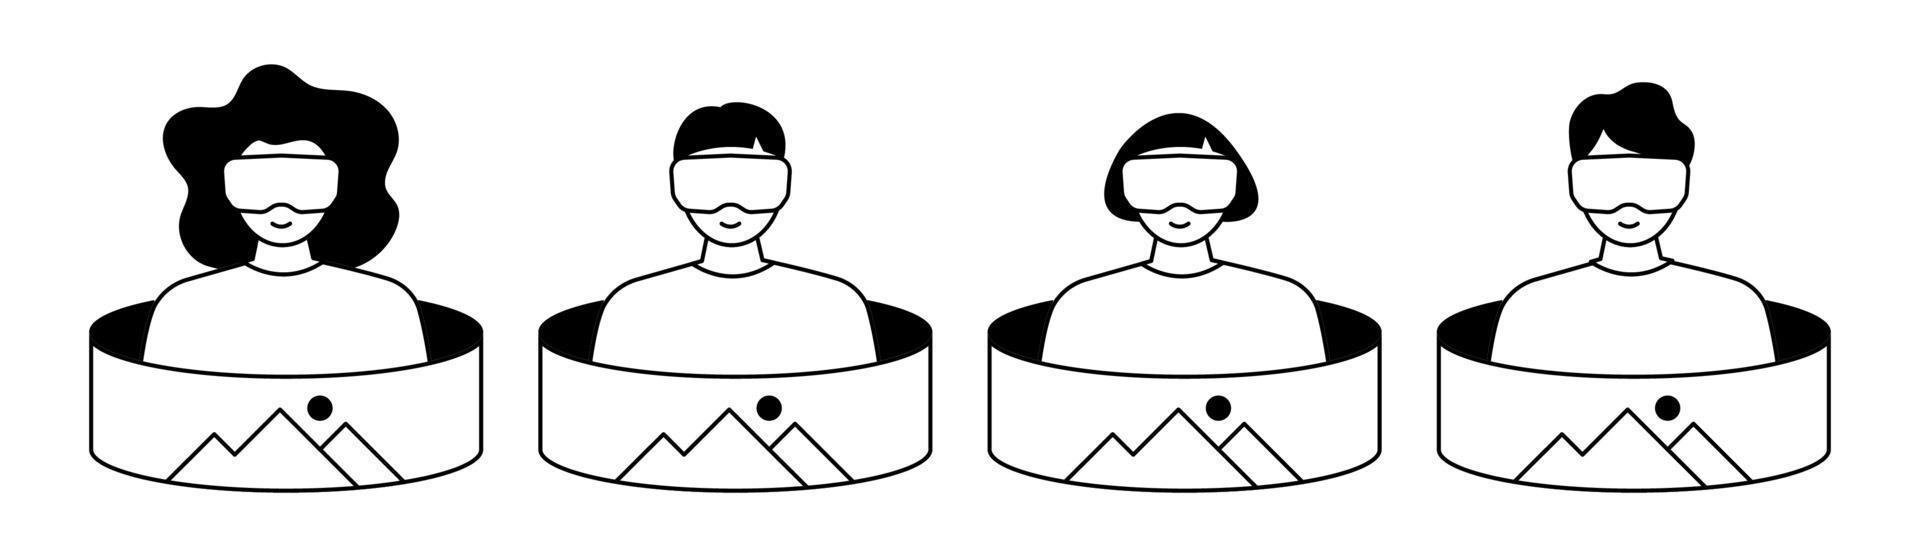 People wearing virtual reality glasses. Icon set. vector